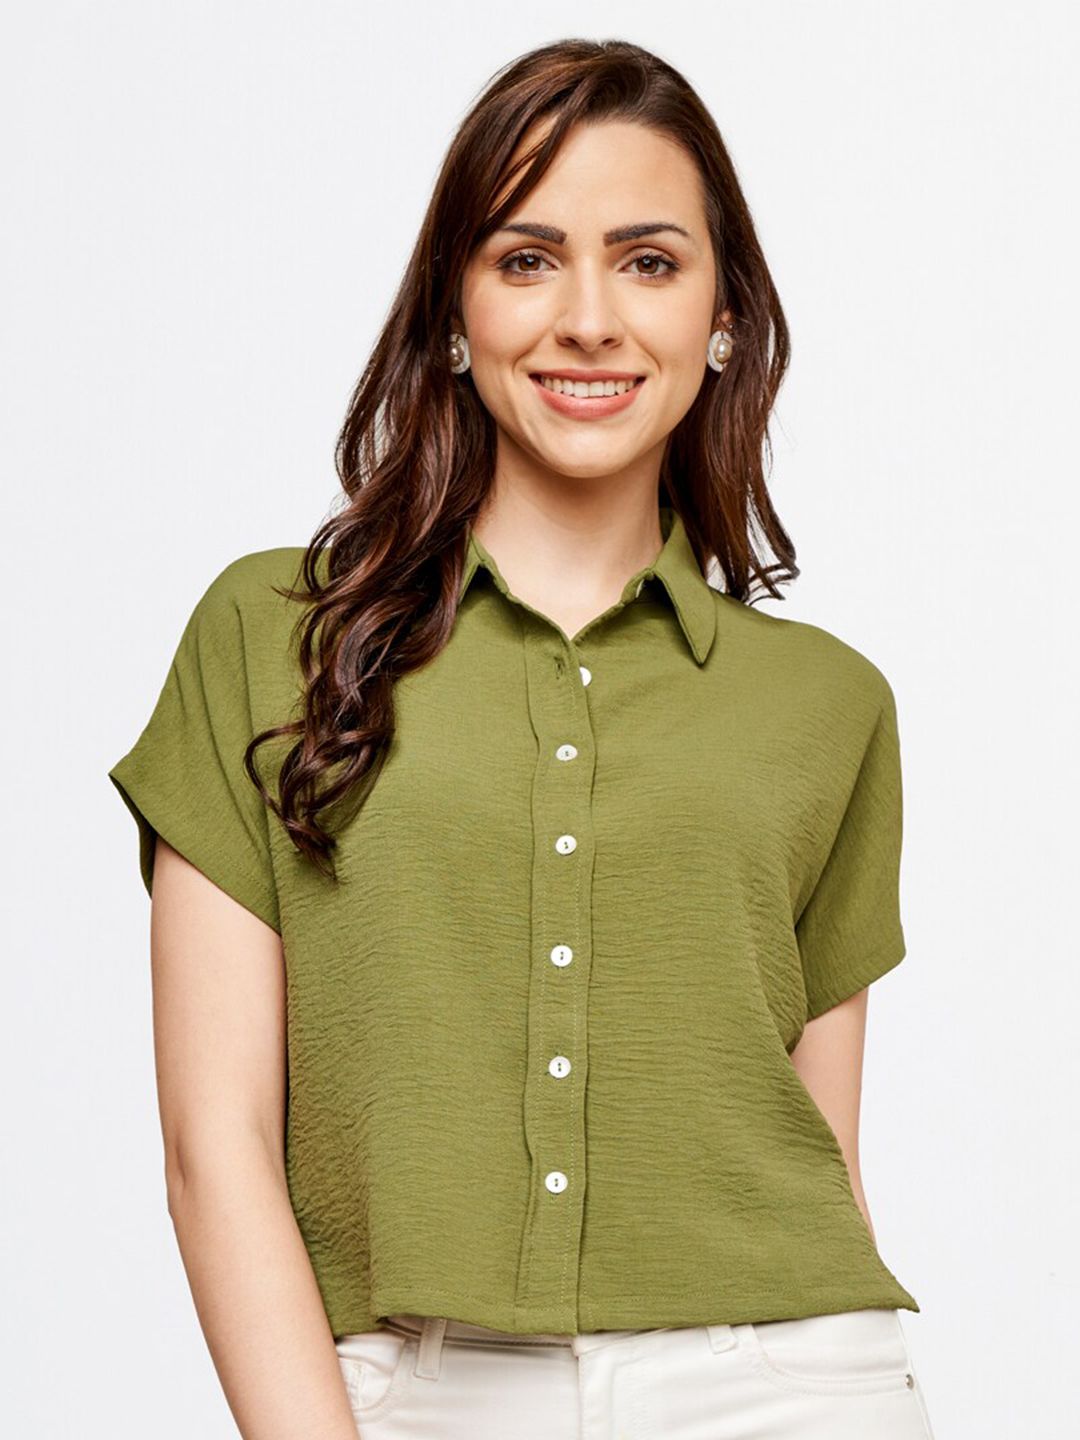 AND Olive Green Shirt Style Crop Top Price in India